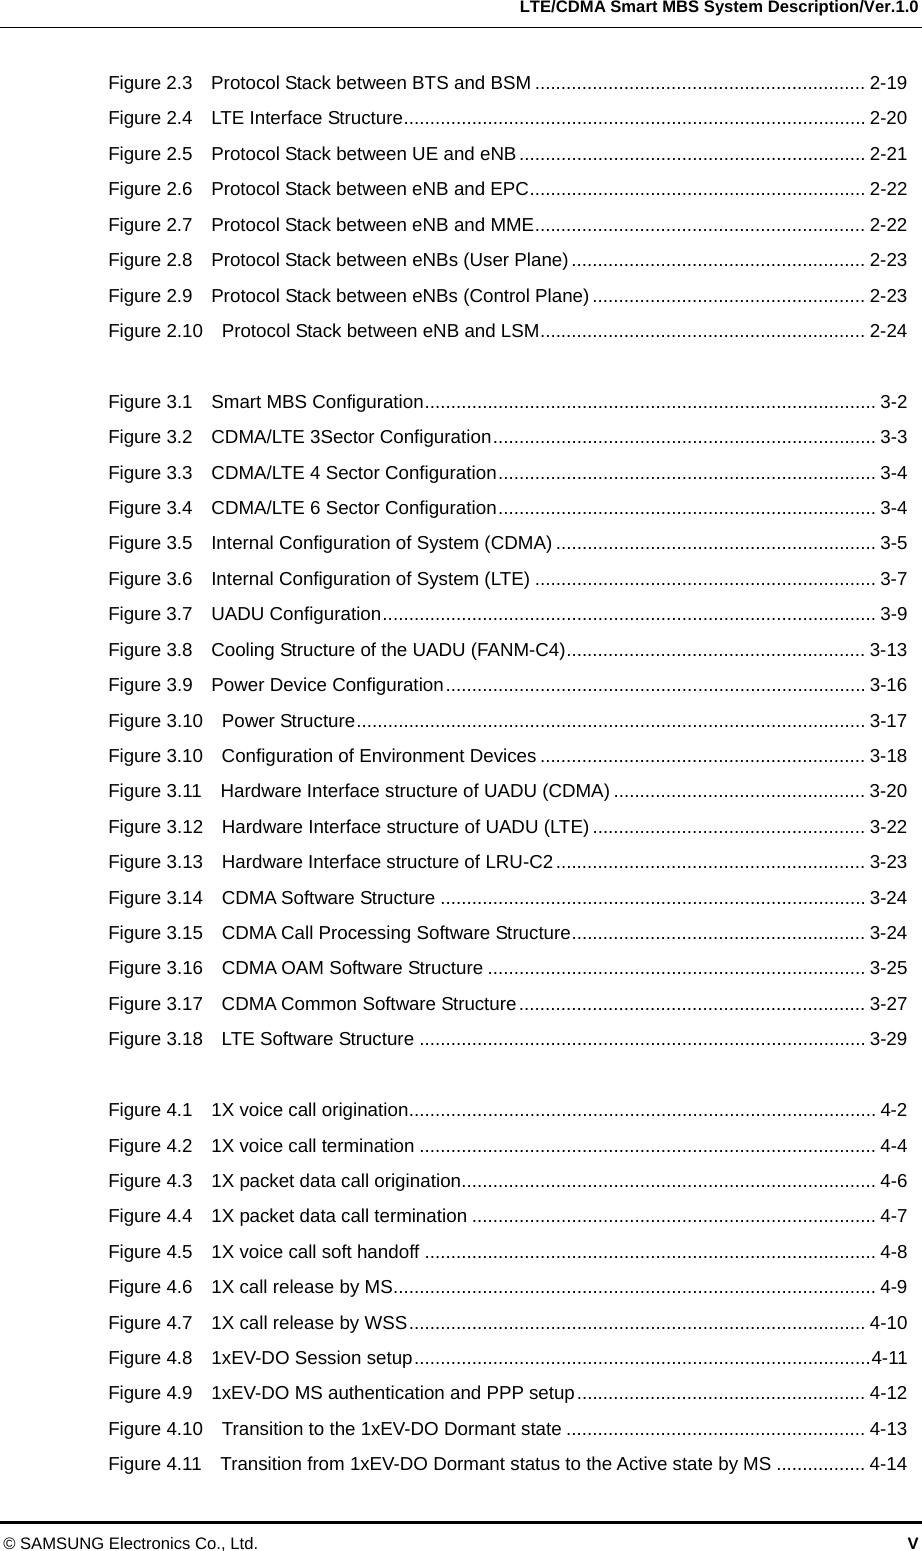   LTE/CDMA Smart MBS System Description/Ver.1.0 © SAMSUNG Electronics Co., Ltd.  V Figure 2.3  Protocol Stack between BTS and BSM ............................................................... 2-19 Figure 2.4    LTE Interface Structure........................................................................................ 2-20 Figure 2.5  Protocol Stack between UE and eNB.................................................................. 2-21 Figure 2.6  Protocol Stack between eNB and EPC................................................................ 2-22 Figure 2.7  Protocol Stack between eNB and MME............................................................... 2-22 Figure 2.8    Protocol Stack between eNBs (User Plane) ........................................................ 2-23 Figure 2.9    Protocol Stack between eNBs (Control Plane) .................................................... 2-23 Figure 2.10  Protocol Stack between eNB and LSM.............................................................. 2-24  Figure 3.1  Smart MBS Configuration...................................................................................... 3-2 Figure 3.2    CDMA/LTE 3Sector Configuration......................................................................... 3-3 Figure 3.3    CDMA/LTE 4 Sector Configuration........................................................................ 3-4 Figure 3.4    CDMA/LTE 6 Sector Configuration........................................................................ 3-4 Figure 3.5  Internal Configuration of System (CDMA) ............................................................. 3-5 Figure 3.6  Internal Configuration of System (LTE) ................................................................. 3-7 Figure 3.7    UADU Configuration.............................................................................................. 3-9 Figure 3.8    Cooling Structure of the UADU (FANM-C4)......................................................... 3-13 Figure 3.9  Power Device Configuration................................................................................ 3-16 Figure 3.10  Power Structure................................................................................................. 3-17 Figure 3.10  Configuration of Environment Devices .............................................................. 3-18 Figure 3.11  Hardware Interface structure of UADU (CDMA) ................................................ 3-20 Figure 3.12  Hardware Interface structure of UADU (LTE) .................................................... 3-22 Figure 3.13  Hardware Interface structure of LRU-C2........................................................... 3-23 Figure 3.14  CDMA Software Structure ................................................................................. 3-24 Figure 3.15    CDMA Call Processing Software Structure........................................................ 3-24 Figure 3.16    CDMA OAM Software Structure ........................................................................ 3-25 Figure 3.17  CDMA Common Software Structure.................................................................. 3-27 Figure 3.18  LTE Software Structure ..................................................................................... 3-29  Figure 4.1    1X voice call origination......................................................................................... 4-2 Figure 4.2    1X voice call termination ....................................................................................... 4-4 Figure 4.3    1X packet data call origination............................................................................... 4-6 Figure 4.4    1X packet data call termination ............................................................................. 4-7 Figure 4.5    1X voice call soft handoff ...................................................................................... 4-8 Figure 4.6    1X call release by MS............................................................................................ 4-9 Figure 4.7    1X call release by WSS....................................................................................... 4-10 Figure 4.8    1xEV-DO Session setup.......................................................................................4-11 Figure 4.9    1xEV-DO MS authentication and PPP setup....................................................... 4-12 Figure 4.10    Transition to the 1xEV-DO Dormant state ......................................................... 4-13 Figure 4.11    Transition from 1xEV-DO Dormant status to the Active state by MS ................. 4-14 